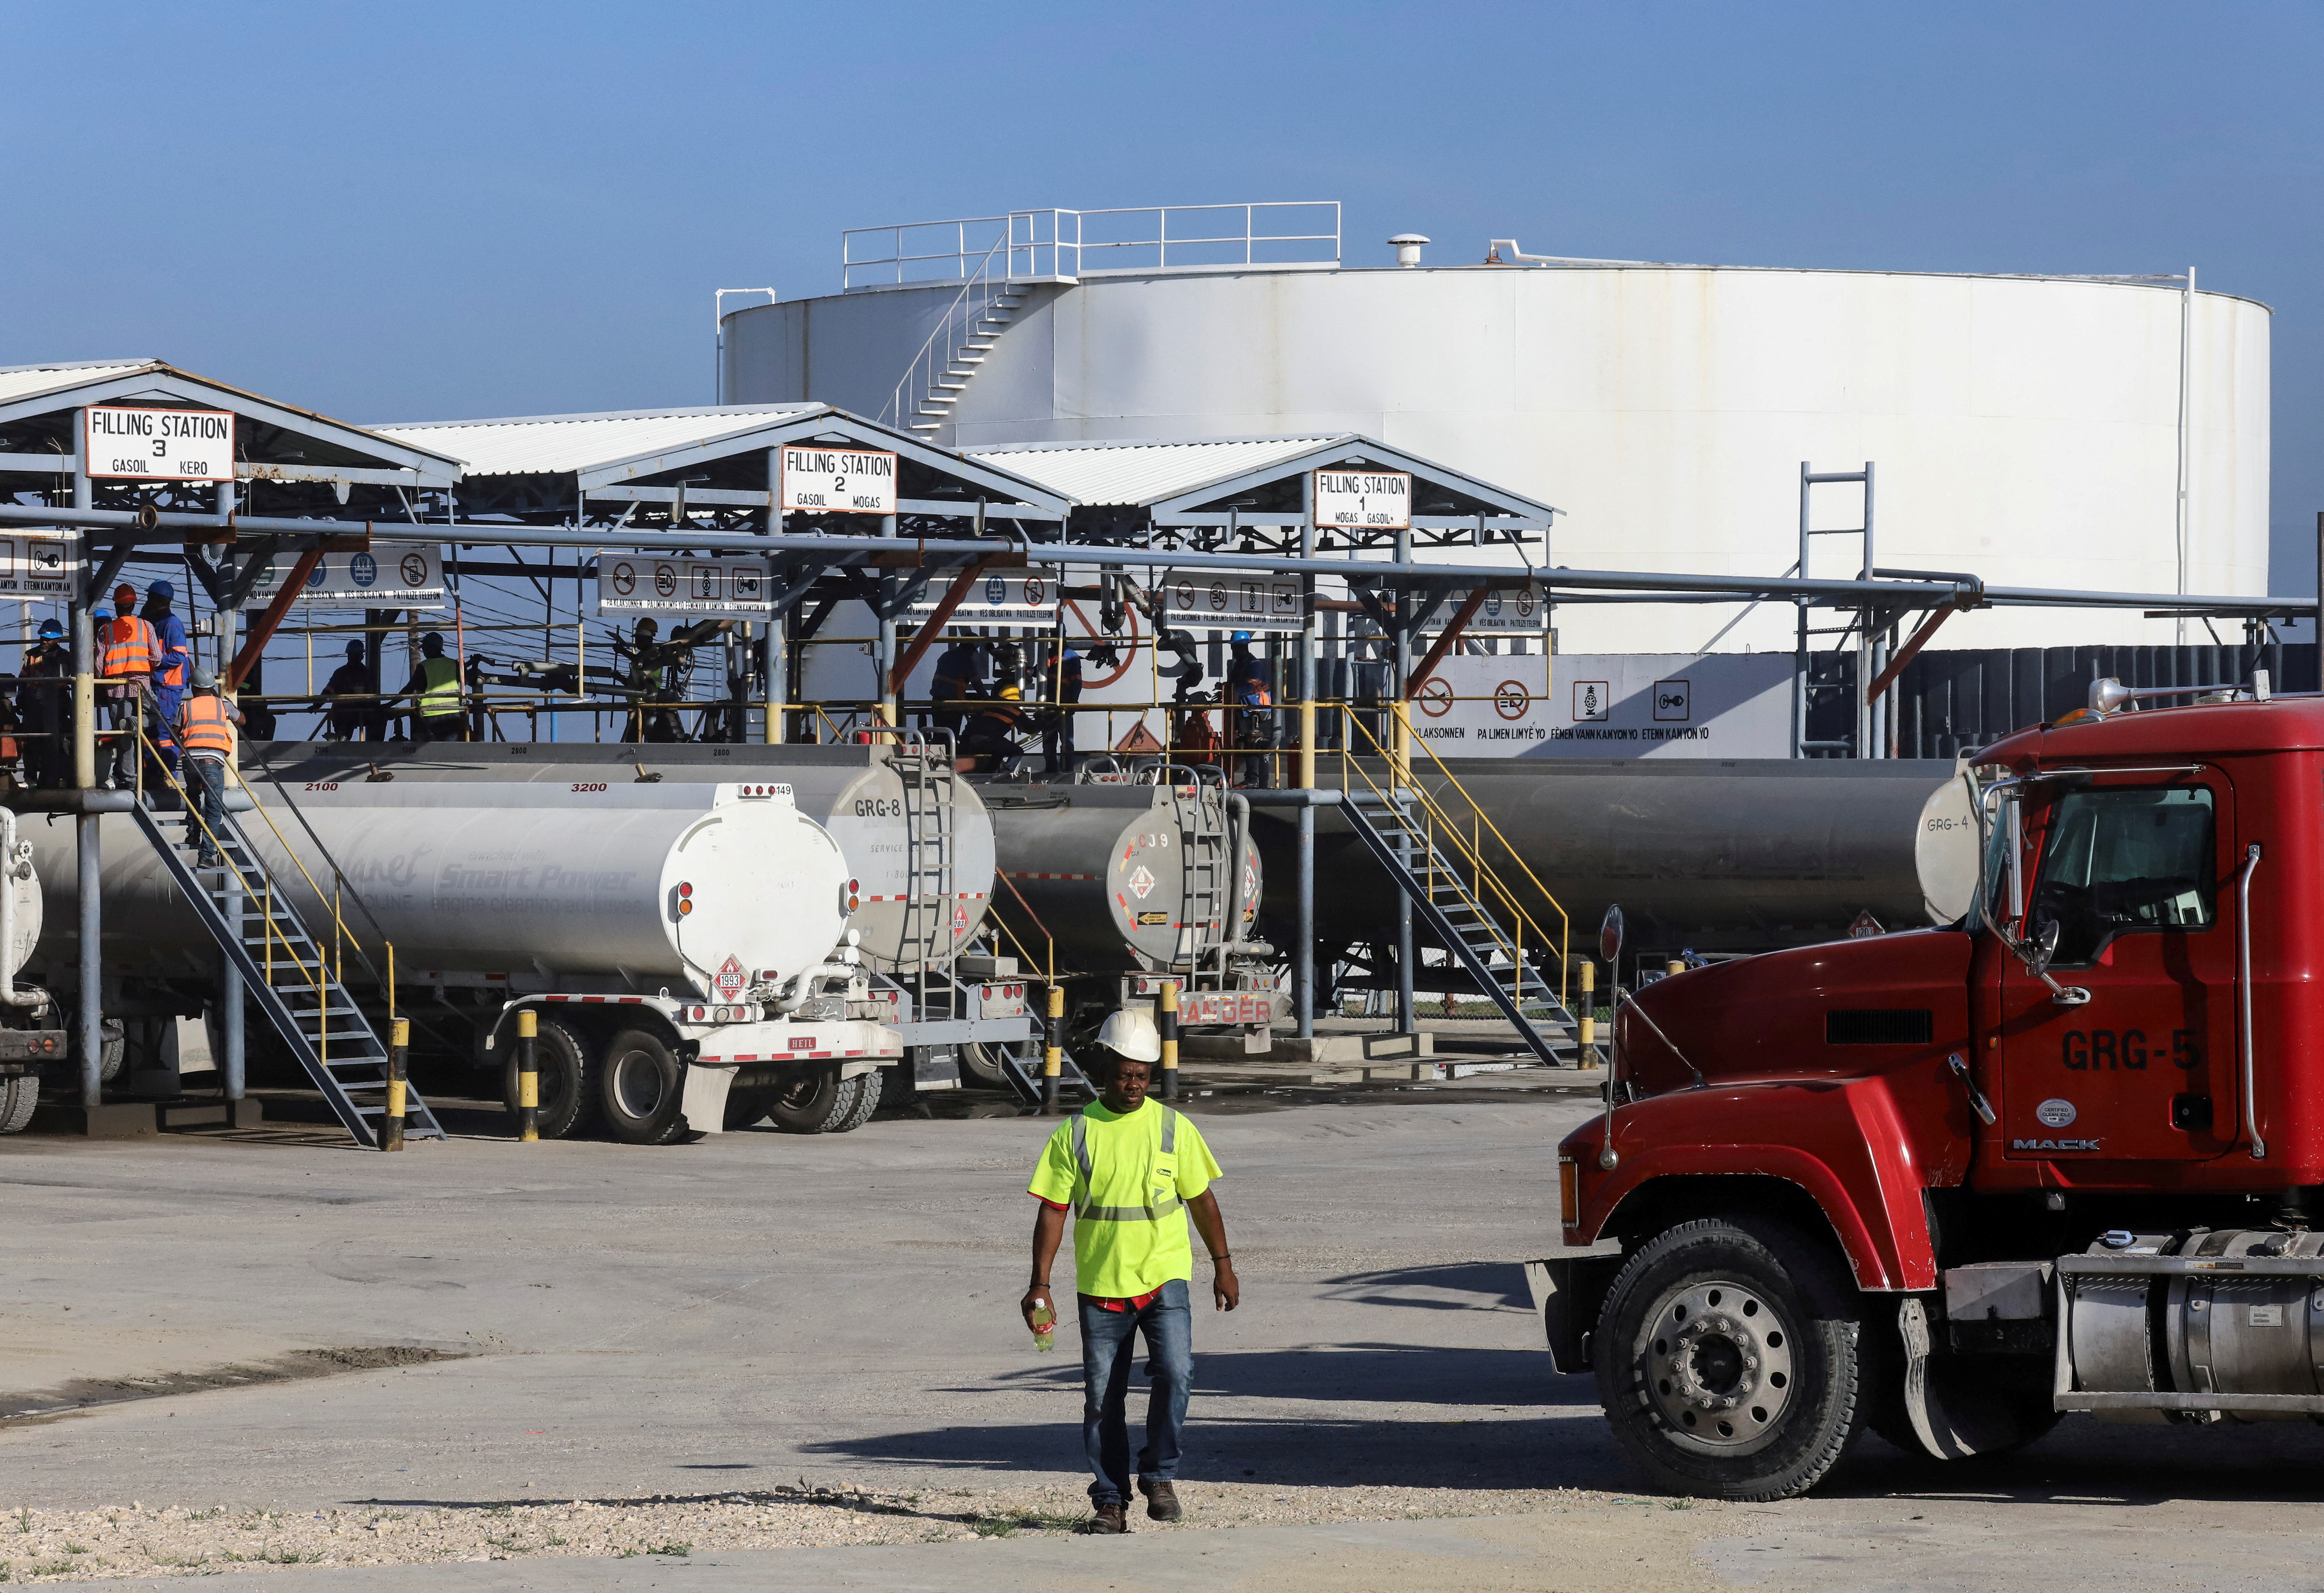 Tanker trucks are being filled with fuel at the Varreux fuel terminal for distribution, in Port-au-Prince